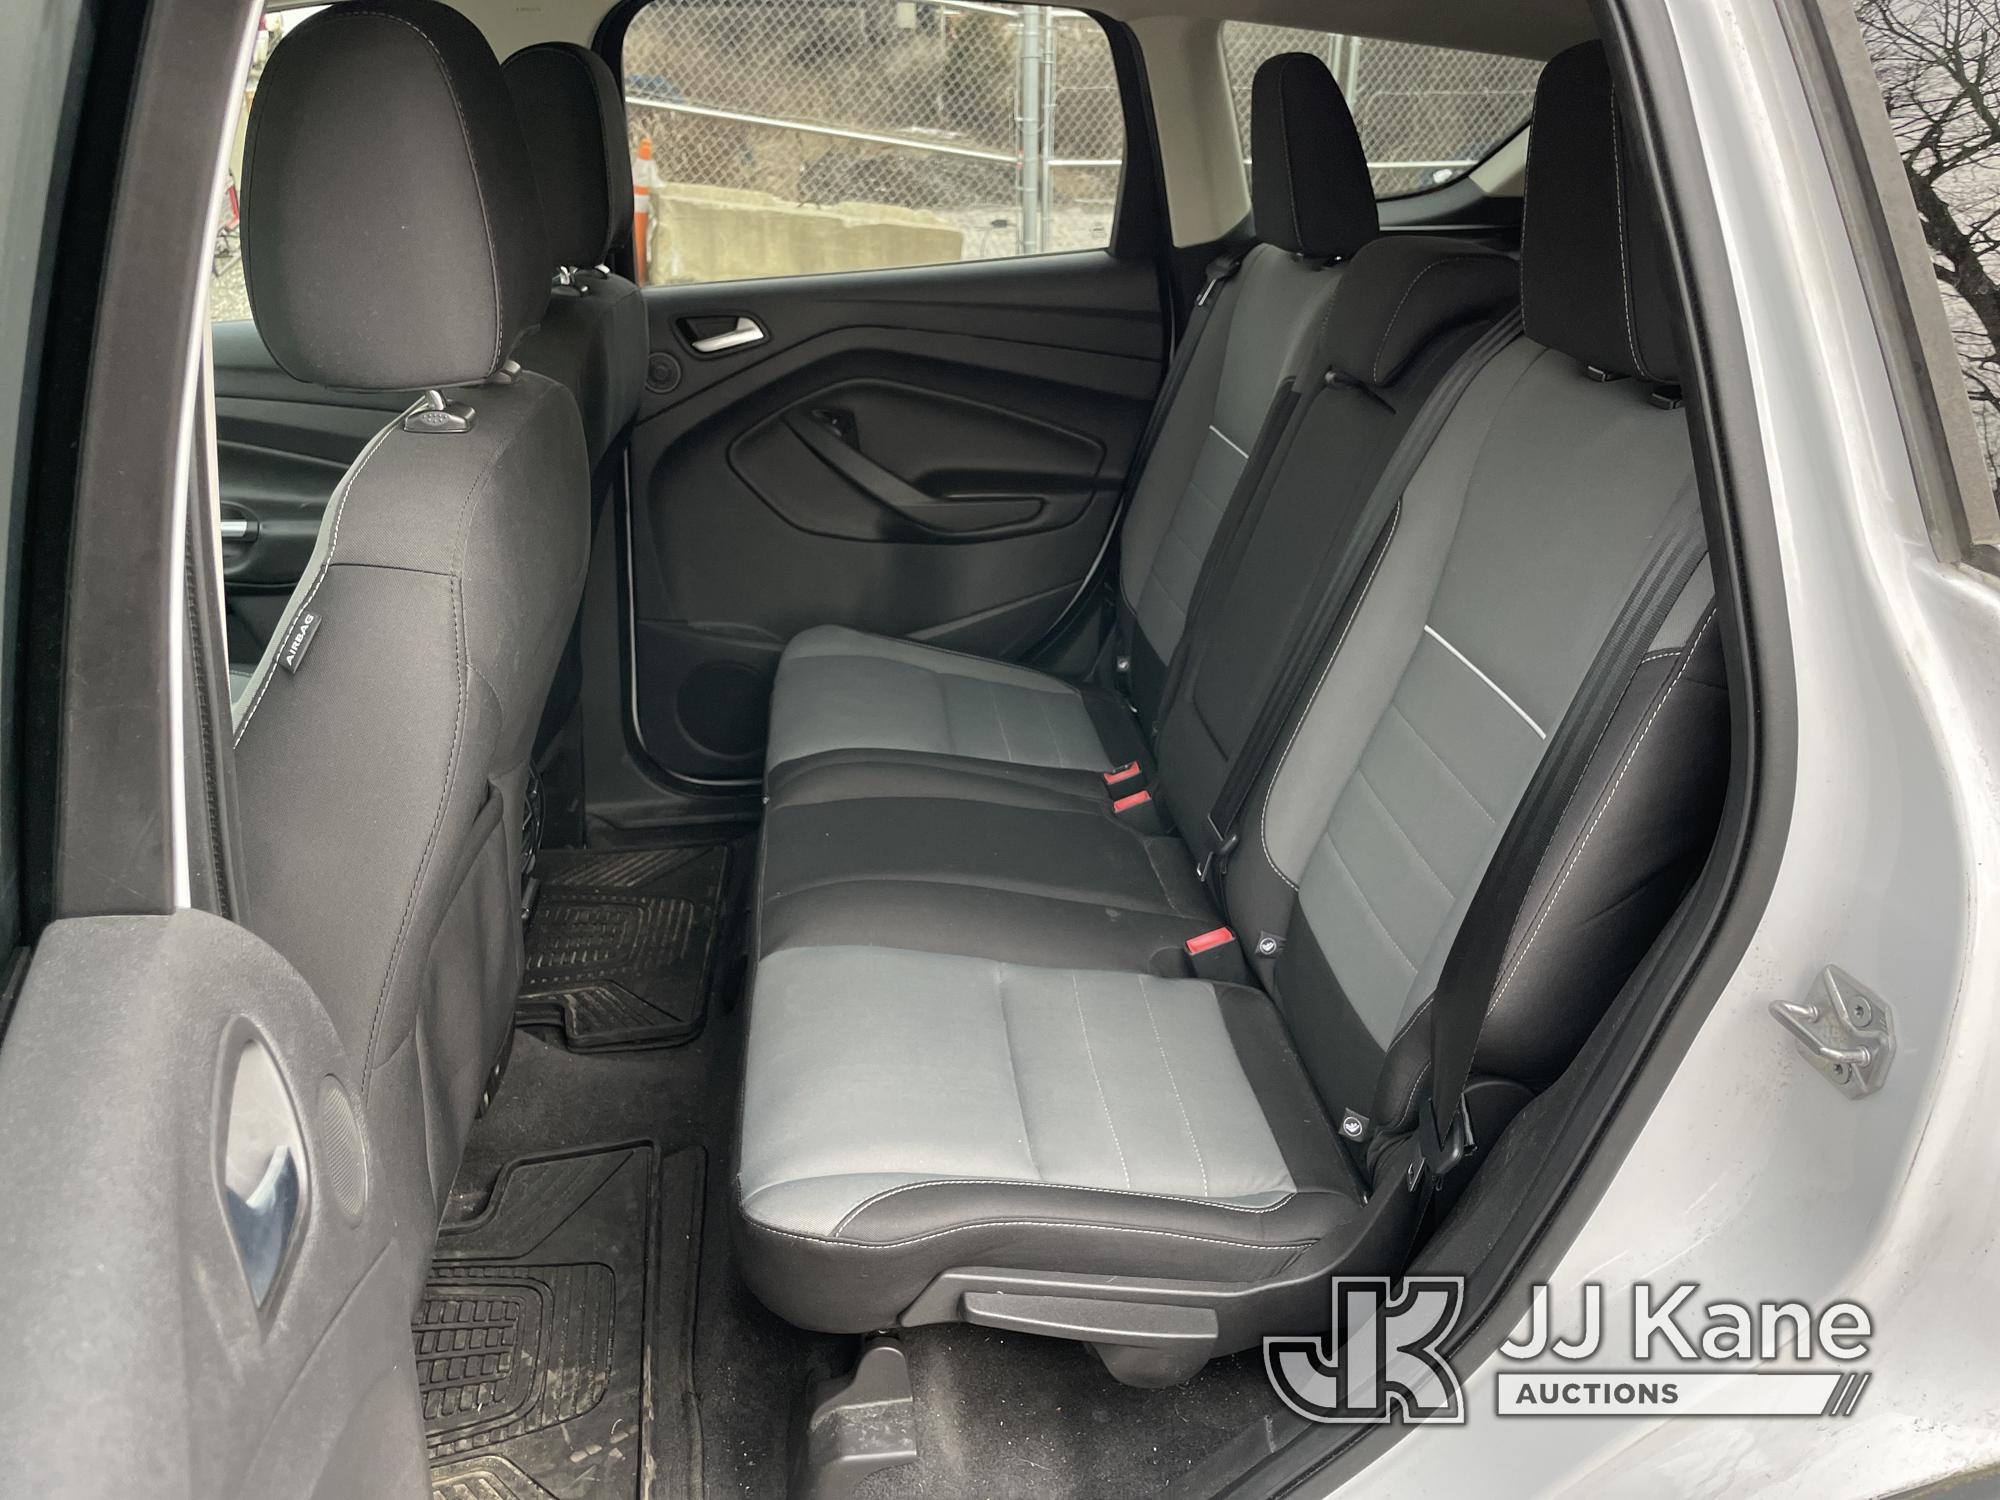 (Plymouth Meeting, PA) 2014 Ford Escape 4x4 4-Door Sport Utility Vehicle Runs & Moves, Minor Body &